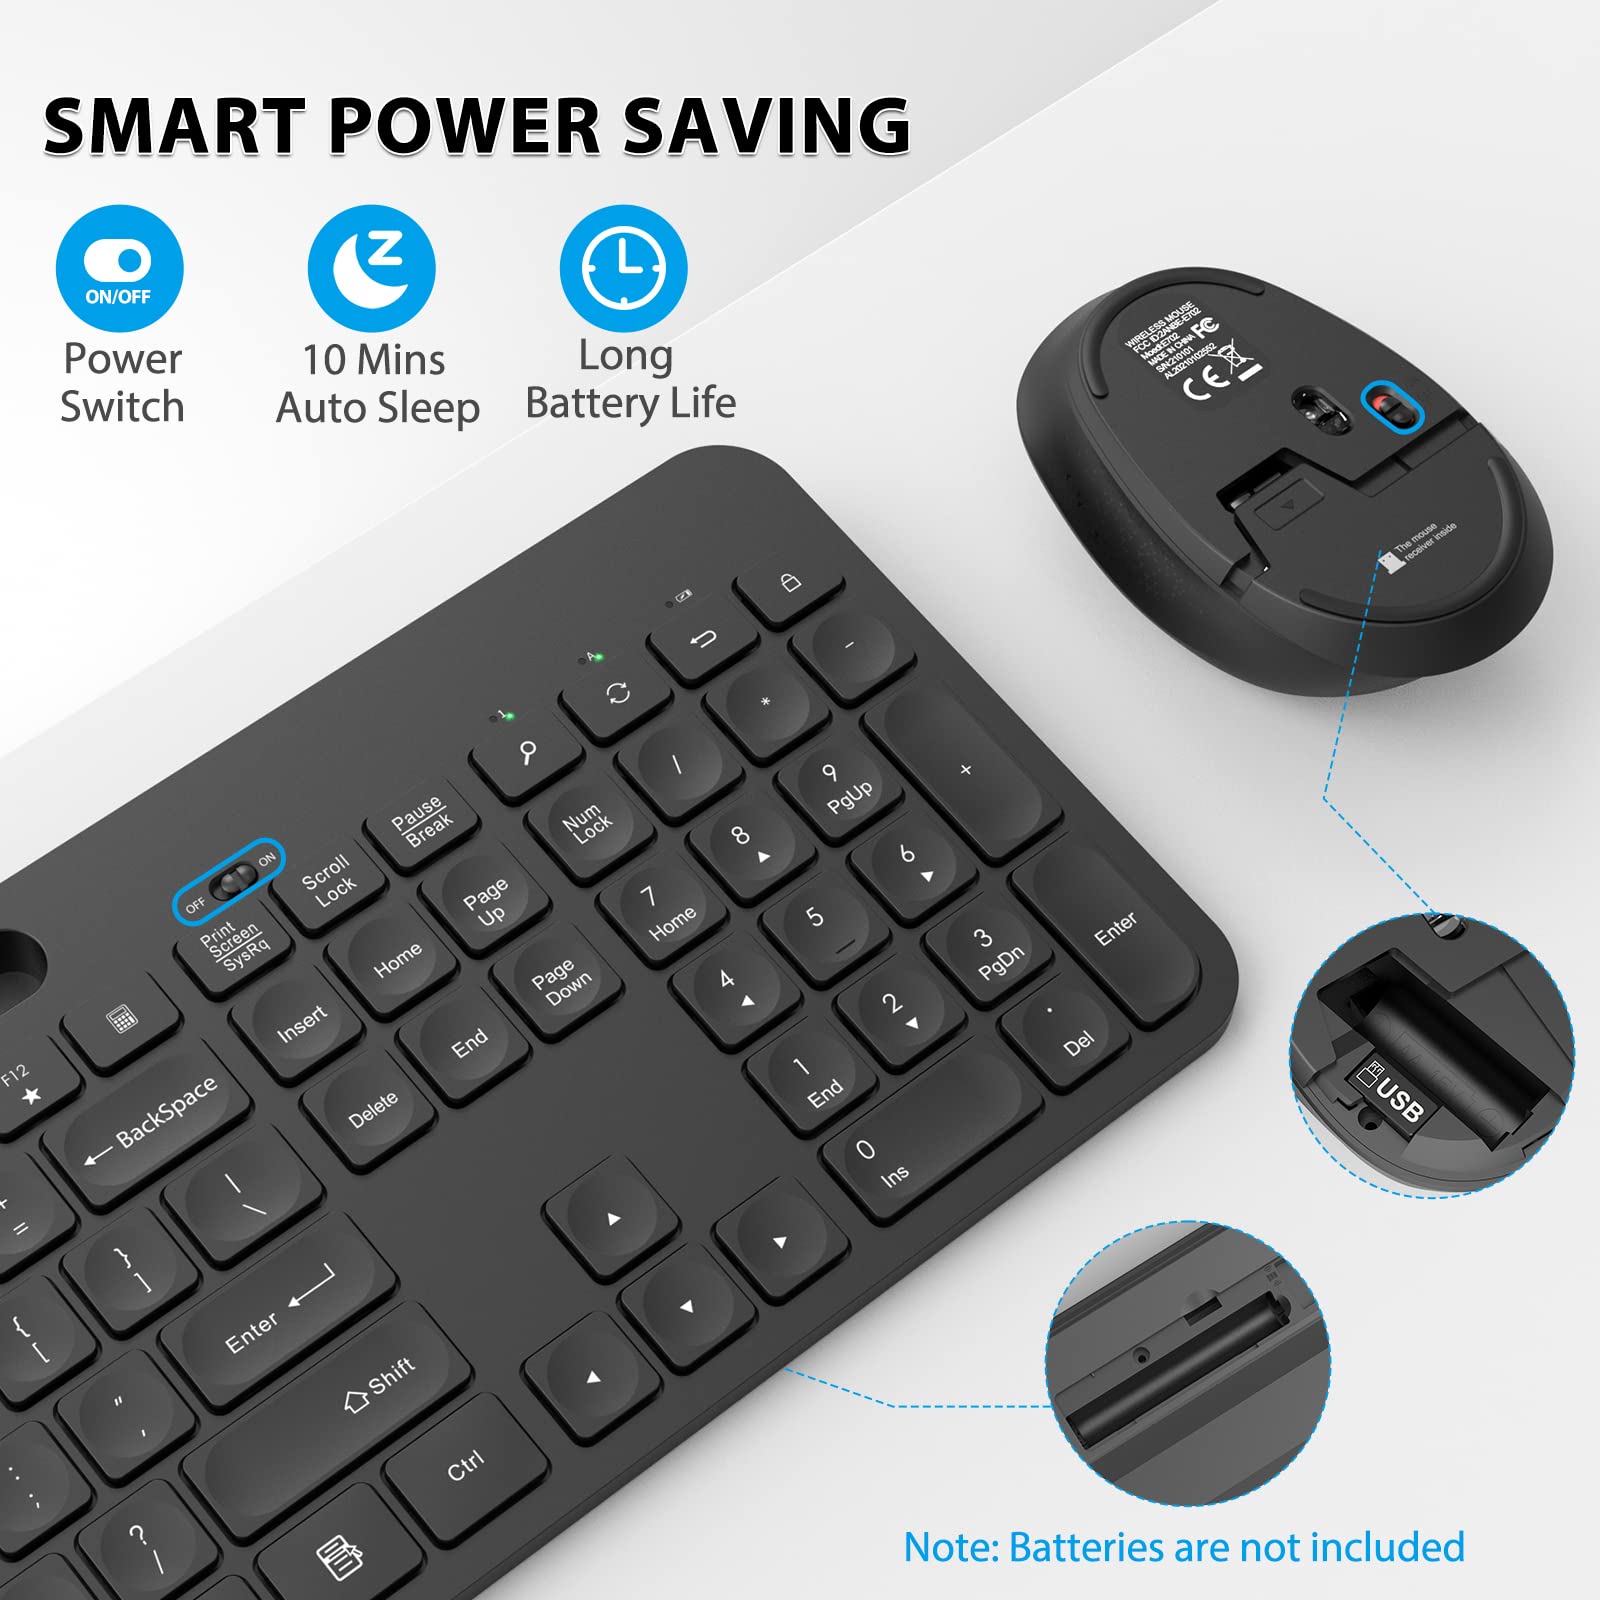 Wireless Keyboard and Mouse Combo, WisFox 2.4GHz Ergonomic USB Keyboard with Phone Holder, Full Size Keyboard and Mouse Set for Computer, Laptop and Desktop(Black)